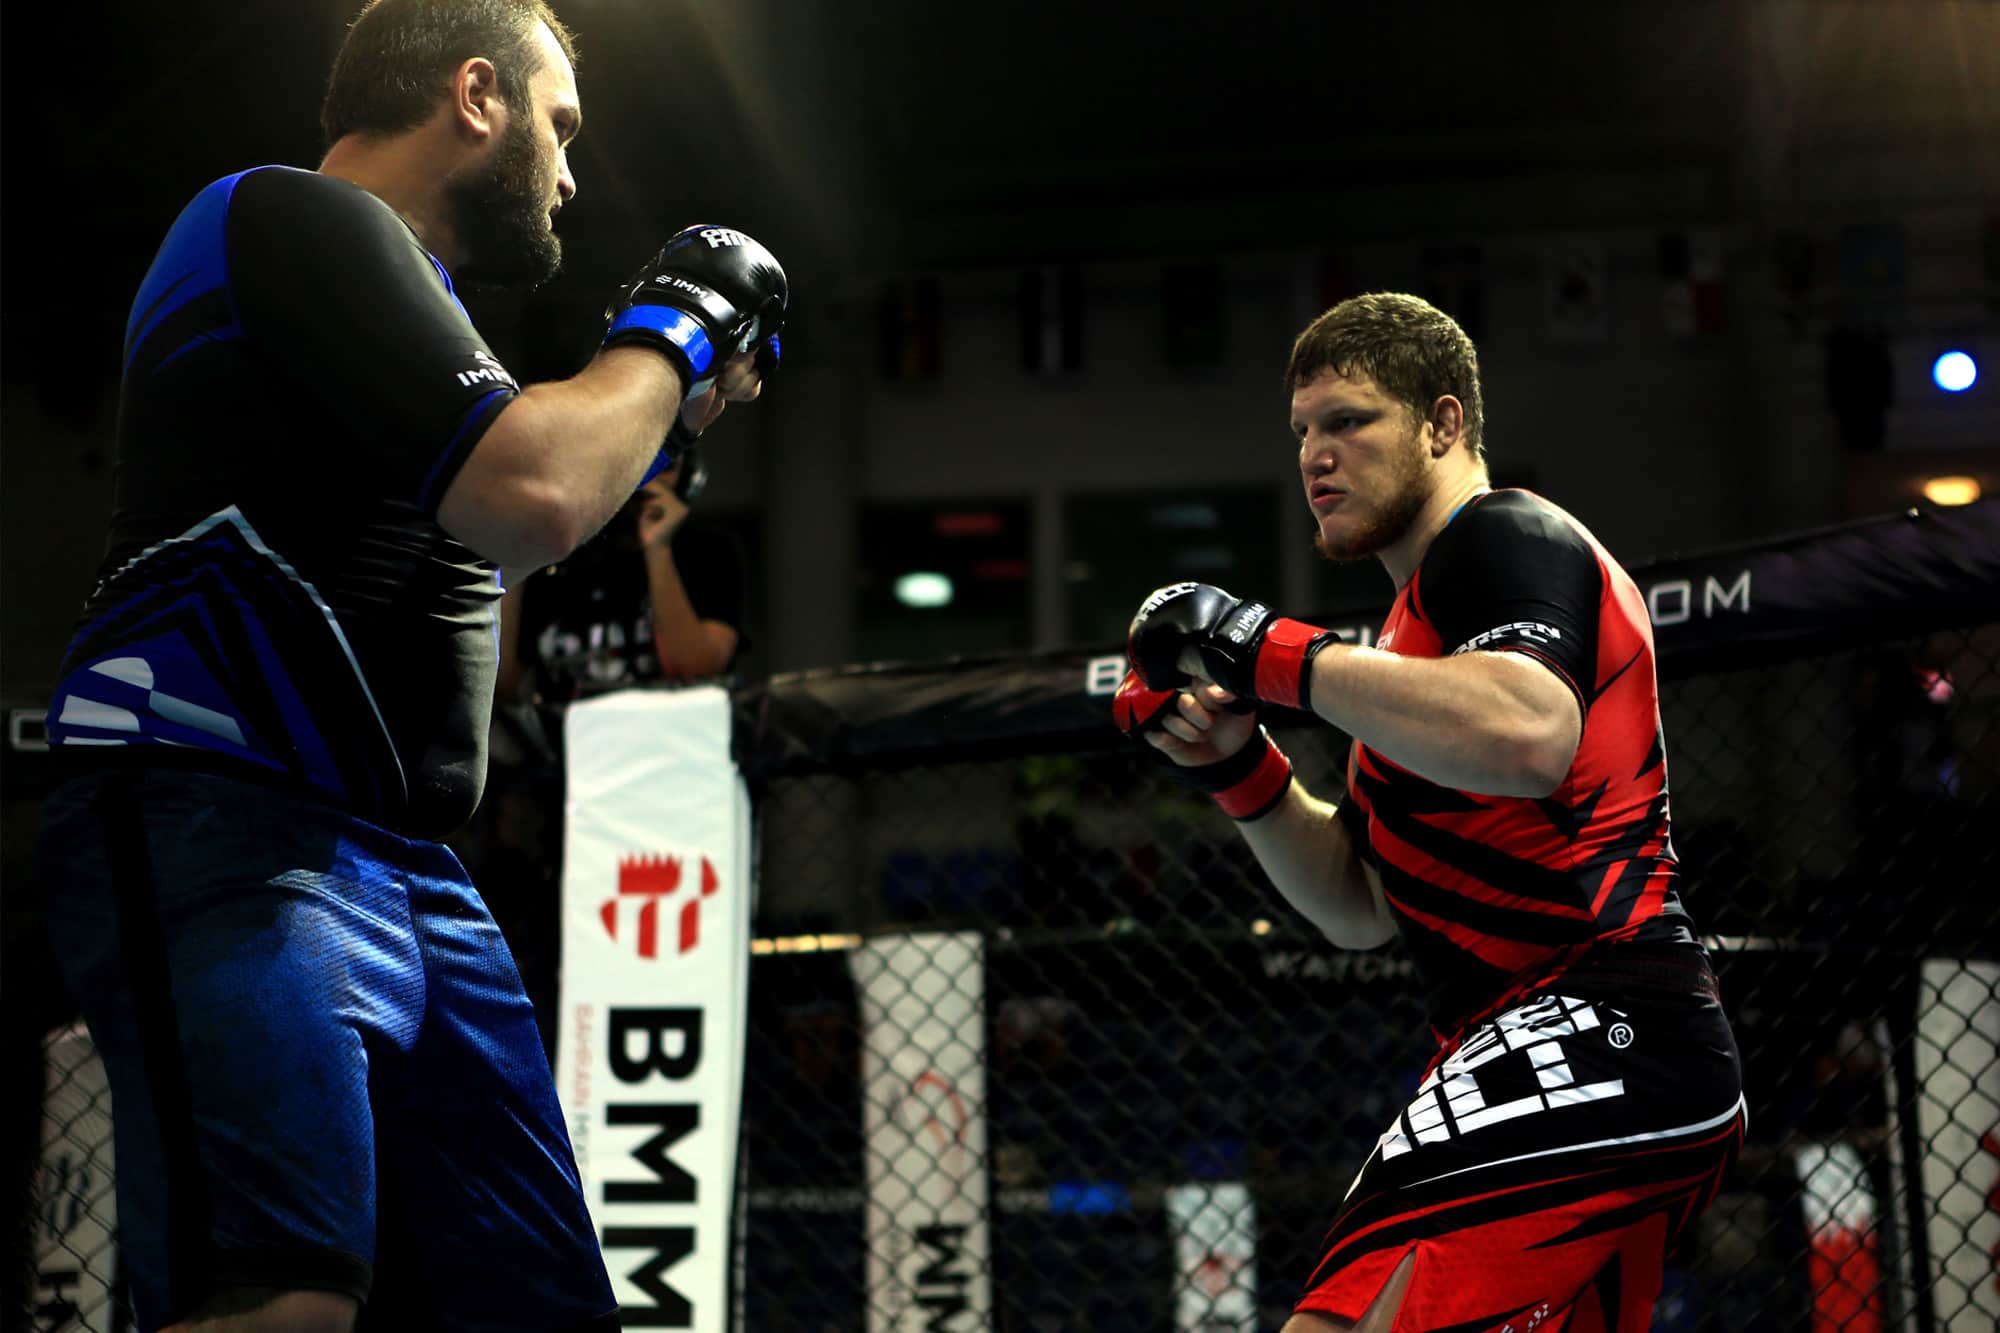 IMMAF Championship fight to be reenacted at AMC Fight Night